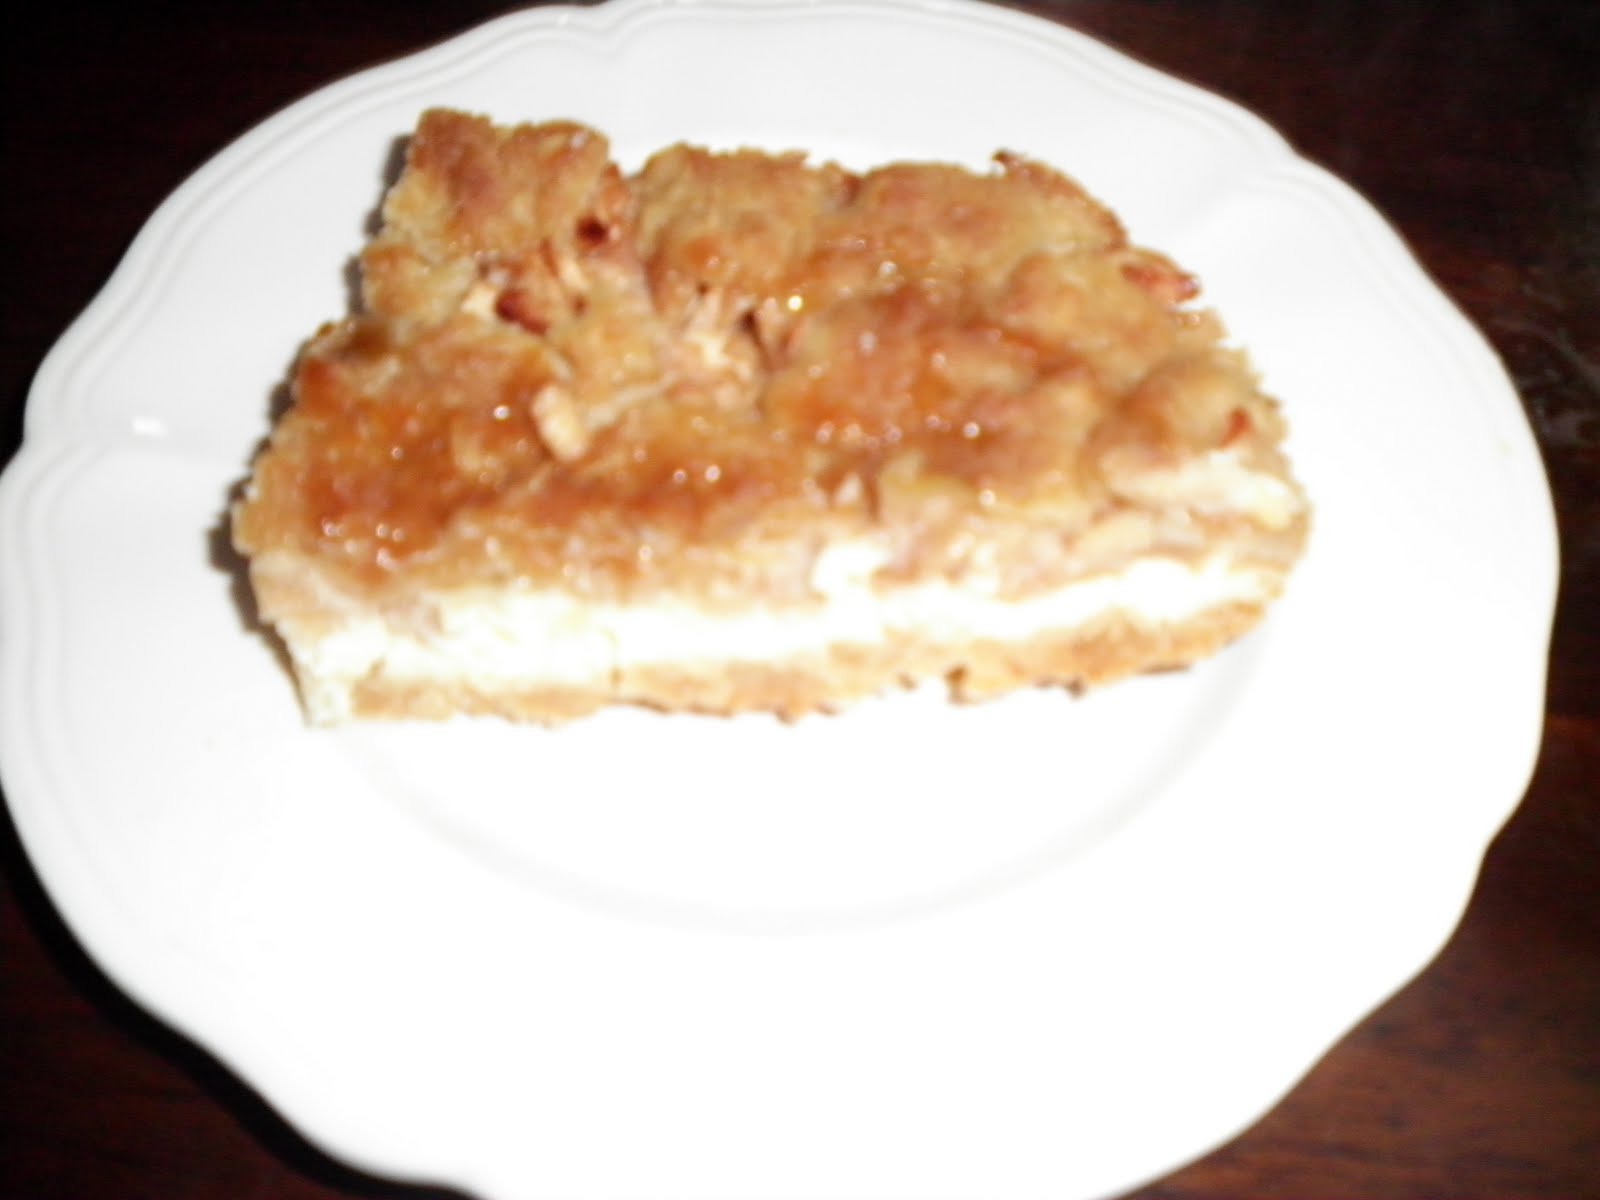 48 Top Pictures Caramel Apple Cheesecake Bars With Streusel Topping - Caramel Apple Cheesecake Bars with Streusel Topping ...